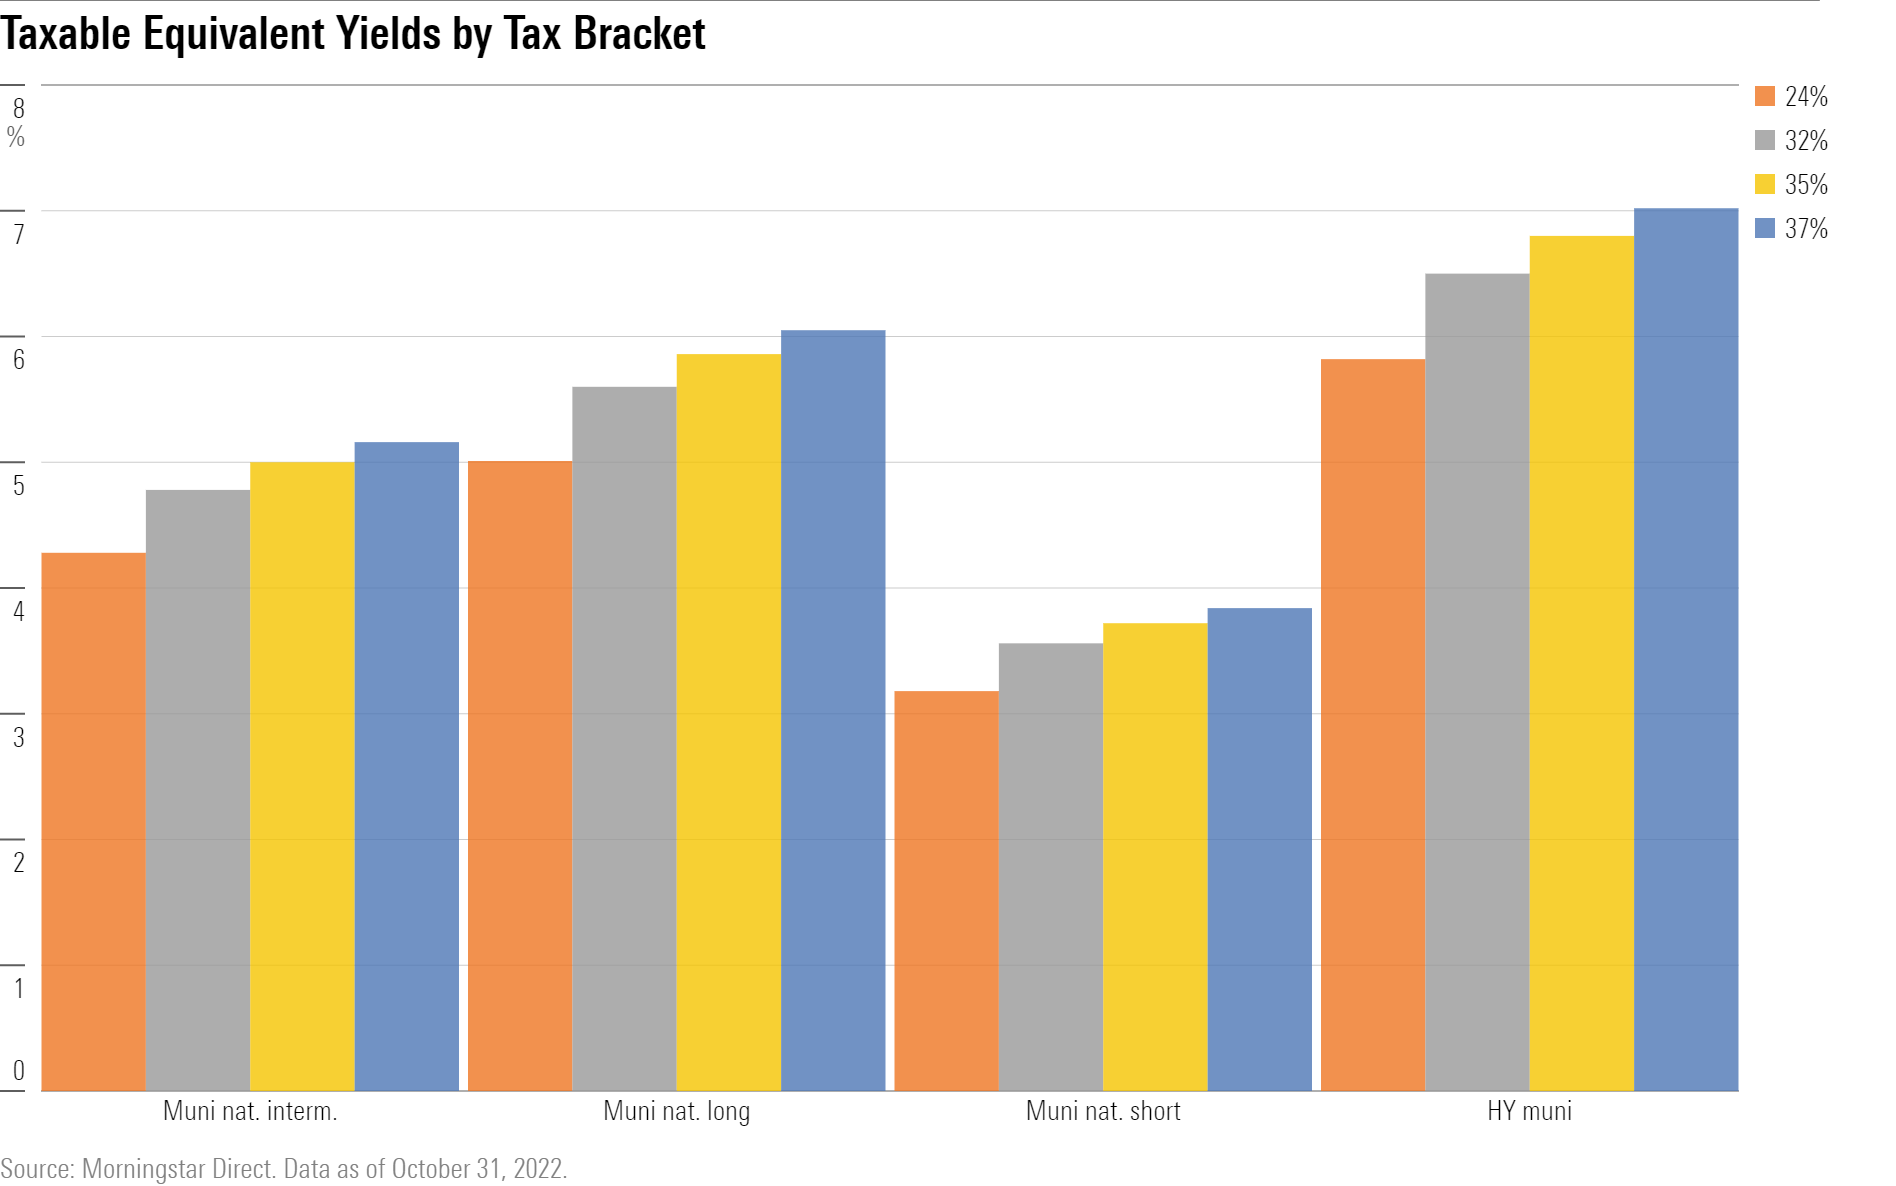 A bar graph showing taxable equivalent yields for investors in the 24%, 32%, 35%, and 37% tax brackets for funds in four different municipal-bond categories.